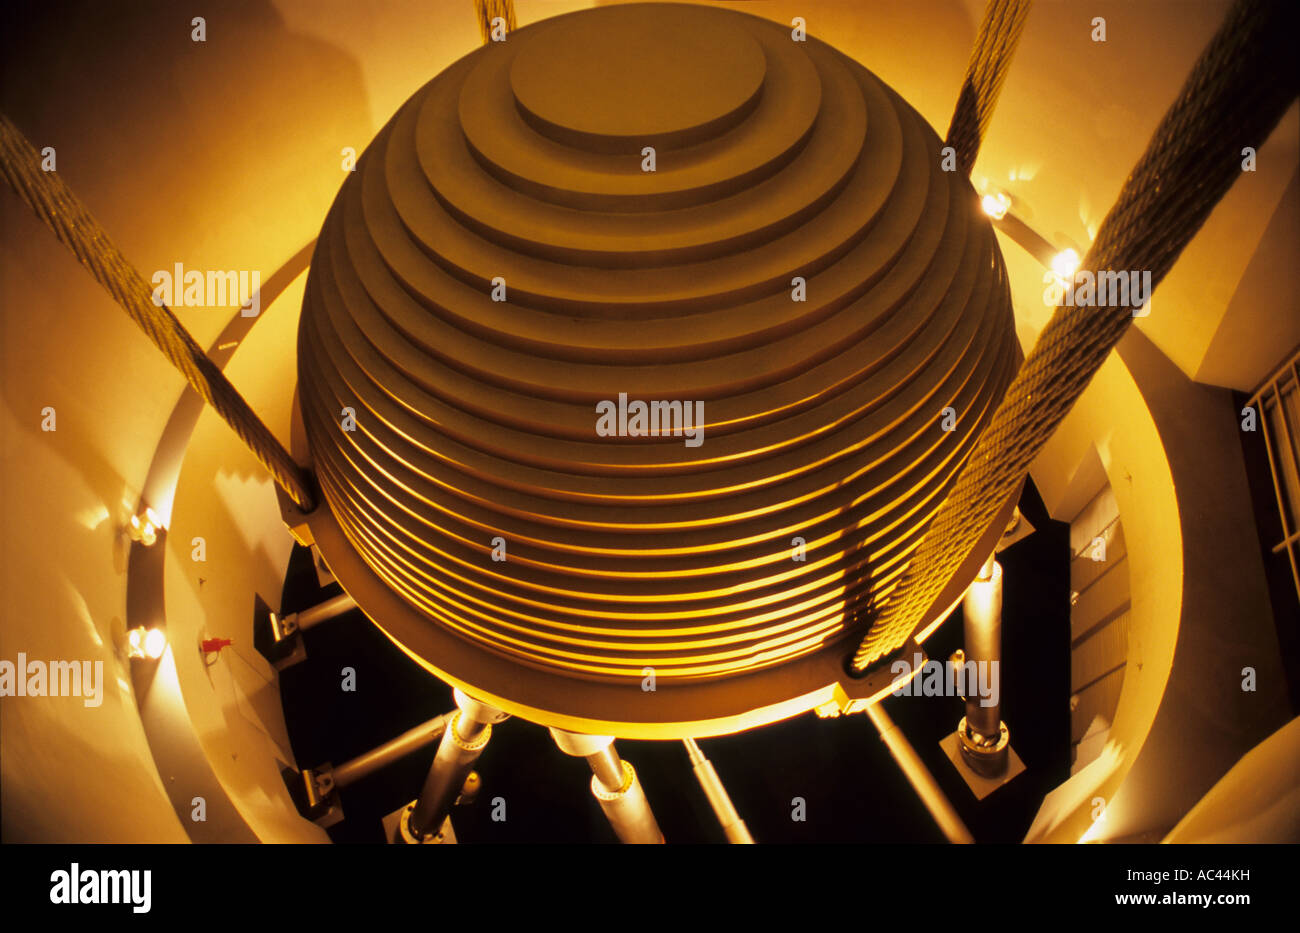 730 ton Tuned Mass Damper TMD Reduces sway of Taipei 101 Building acting like a giant pendulum Stock Photo